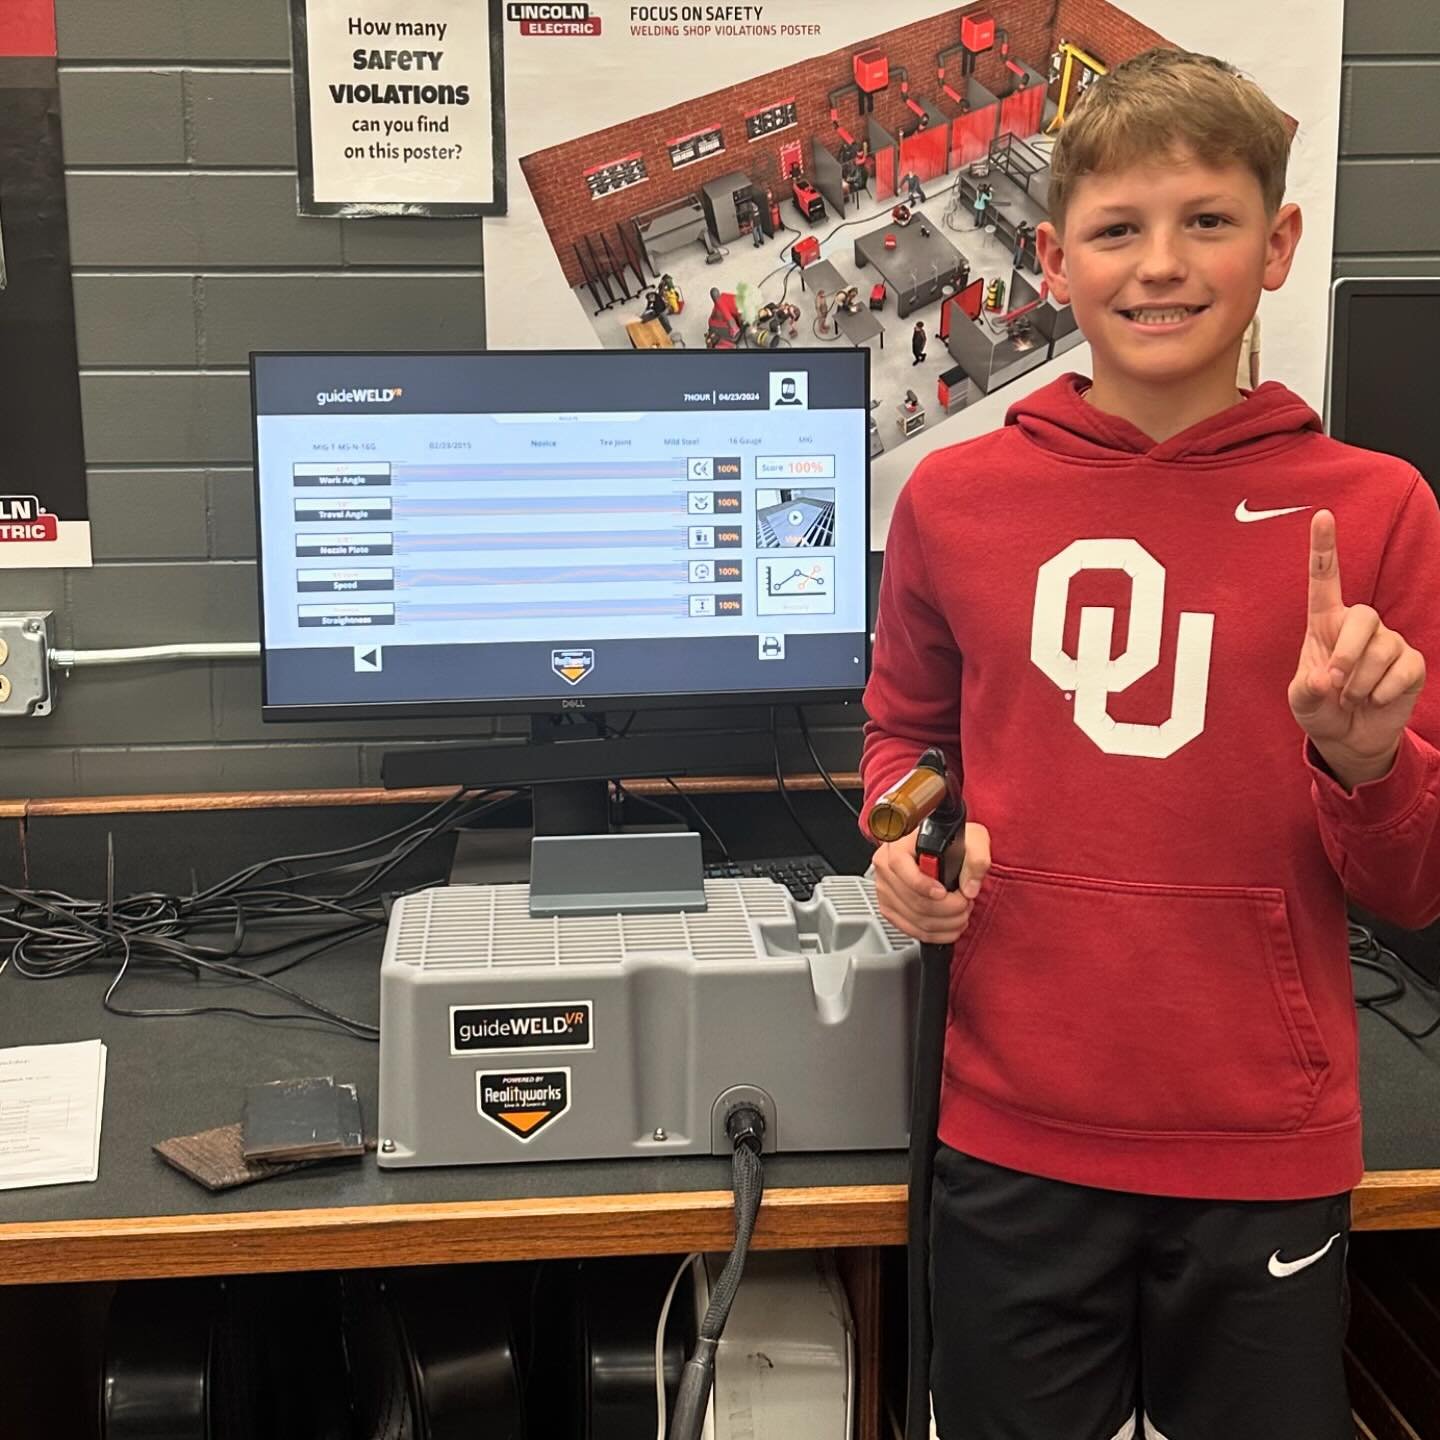 Our first ever perfect score on the virtual welder!! Congrats to 6th grade TAP student Chace Mendell! 

Very impressive!